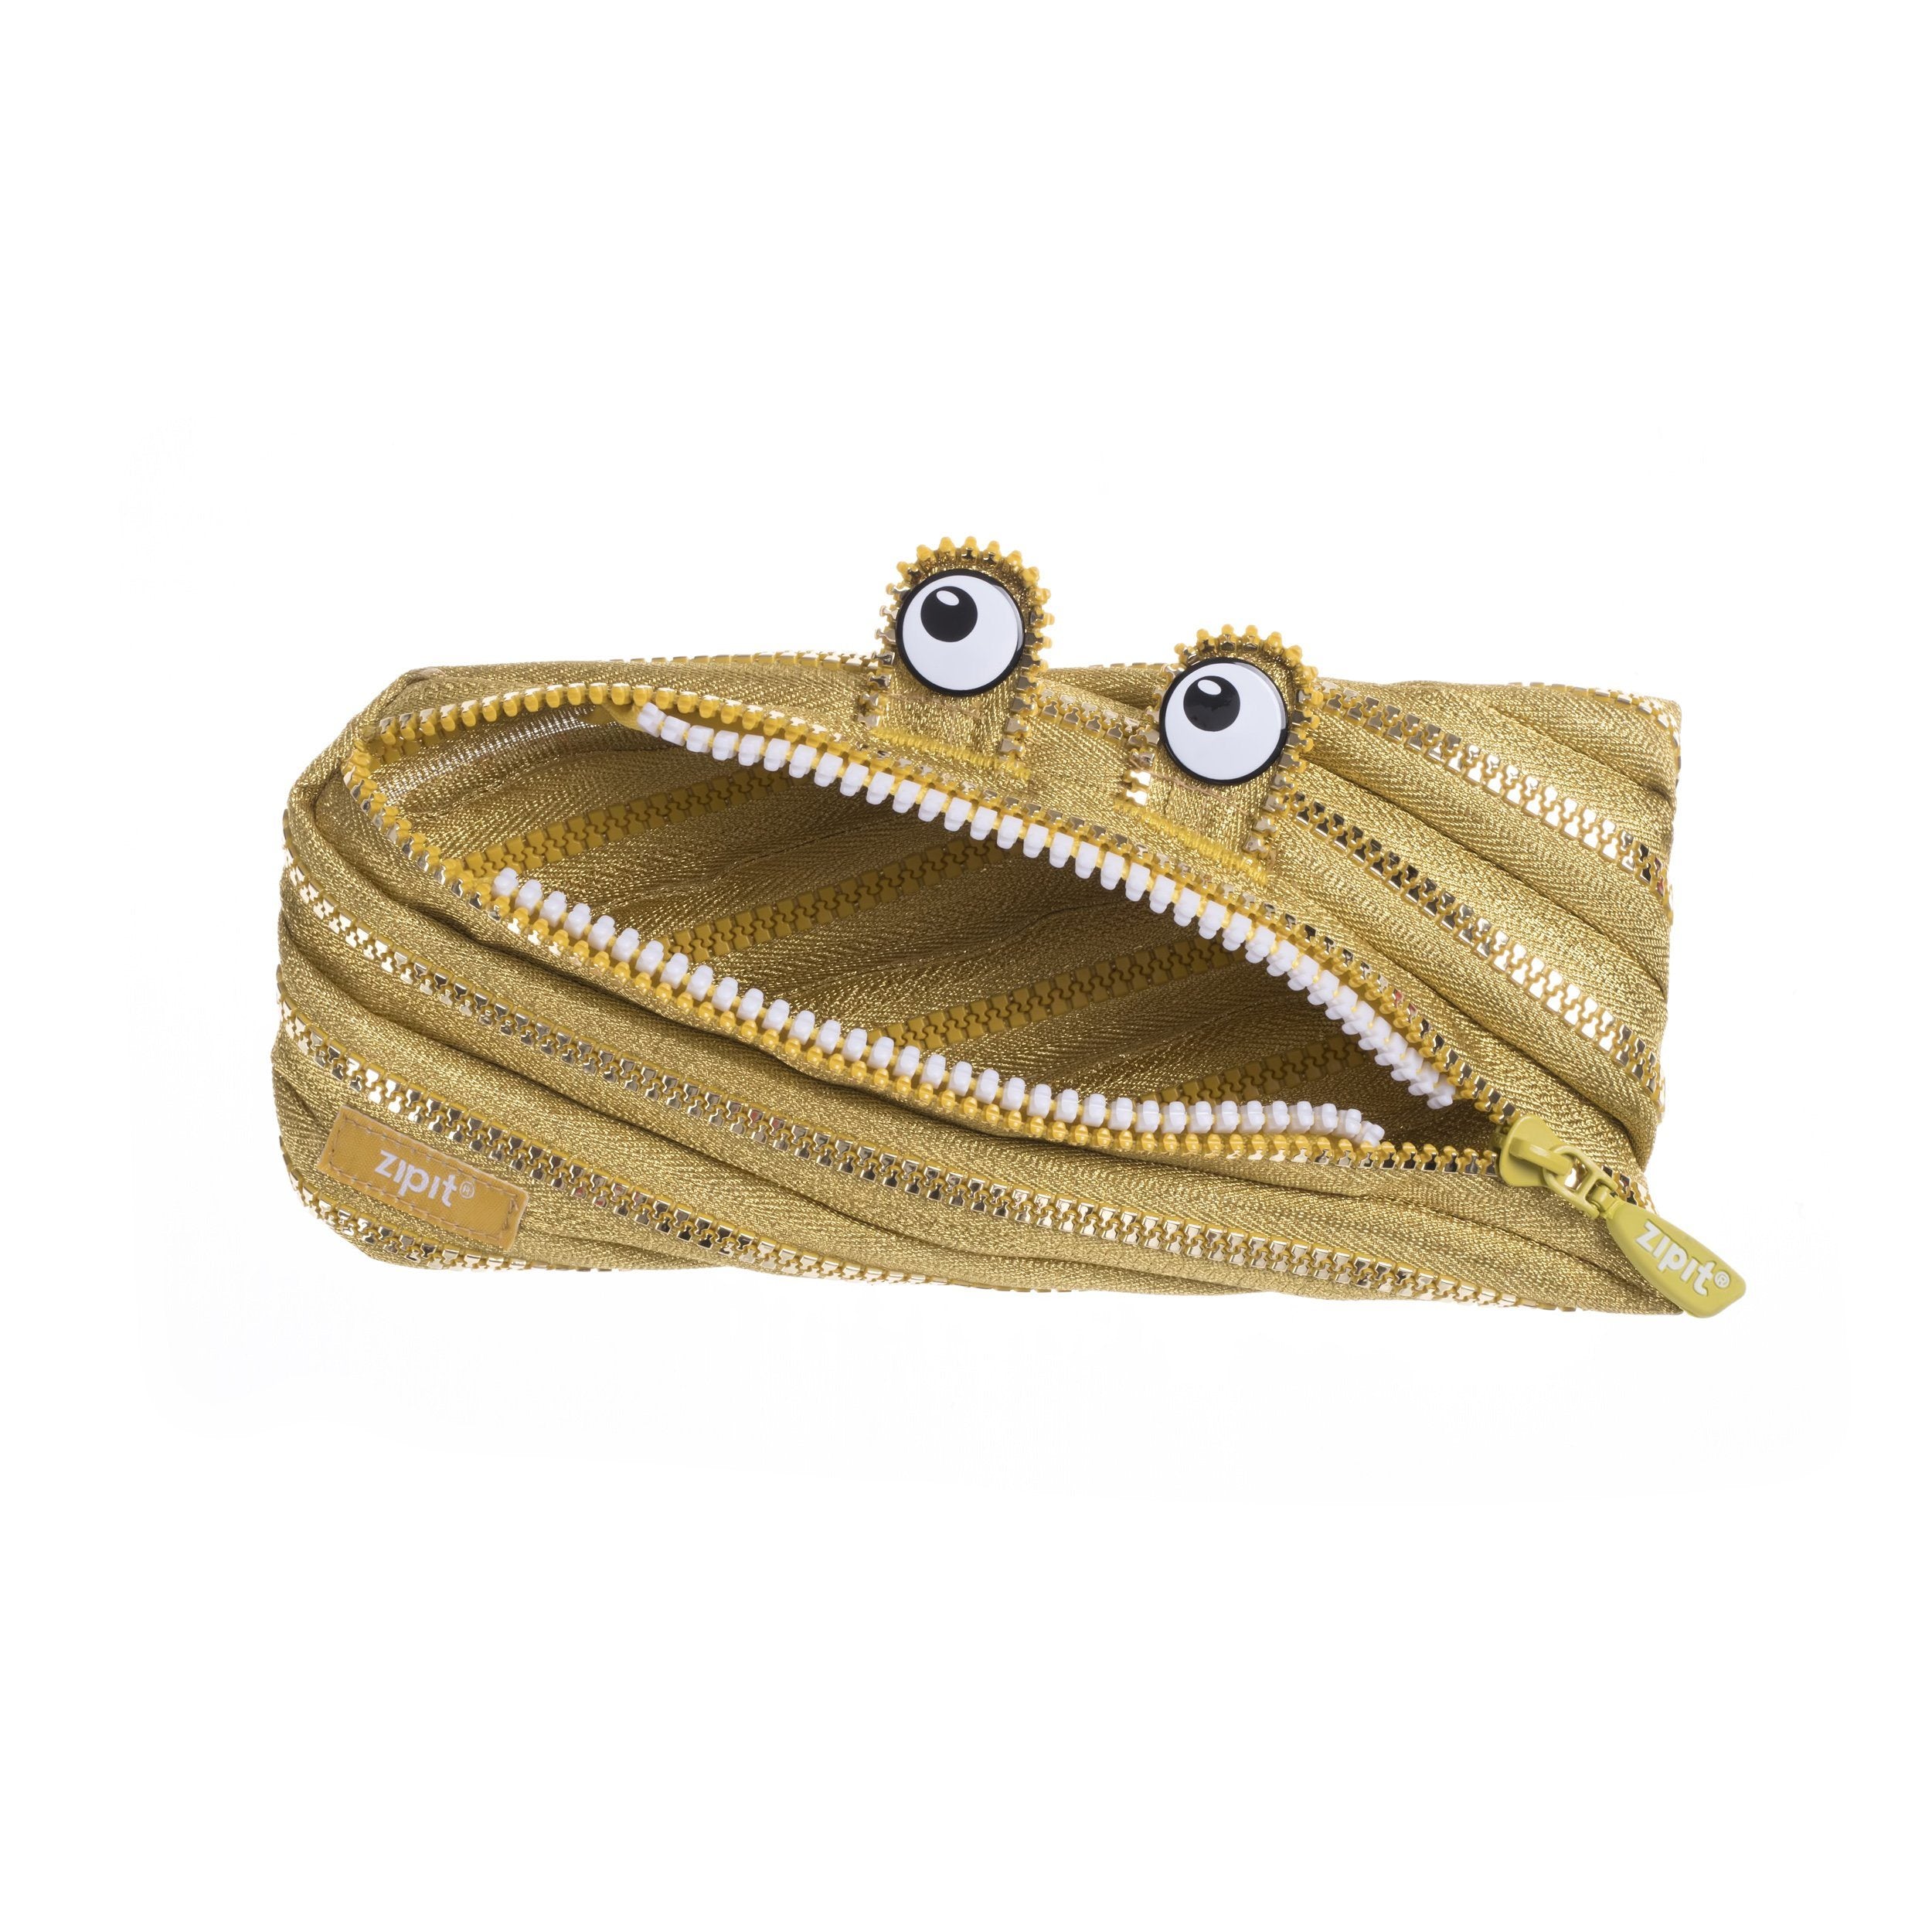 Monster Pouch Special Edition Gold - Coin pouches - Zipit - Naiise (580651548737)